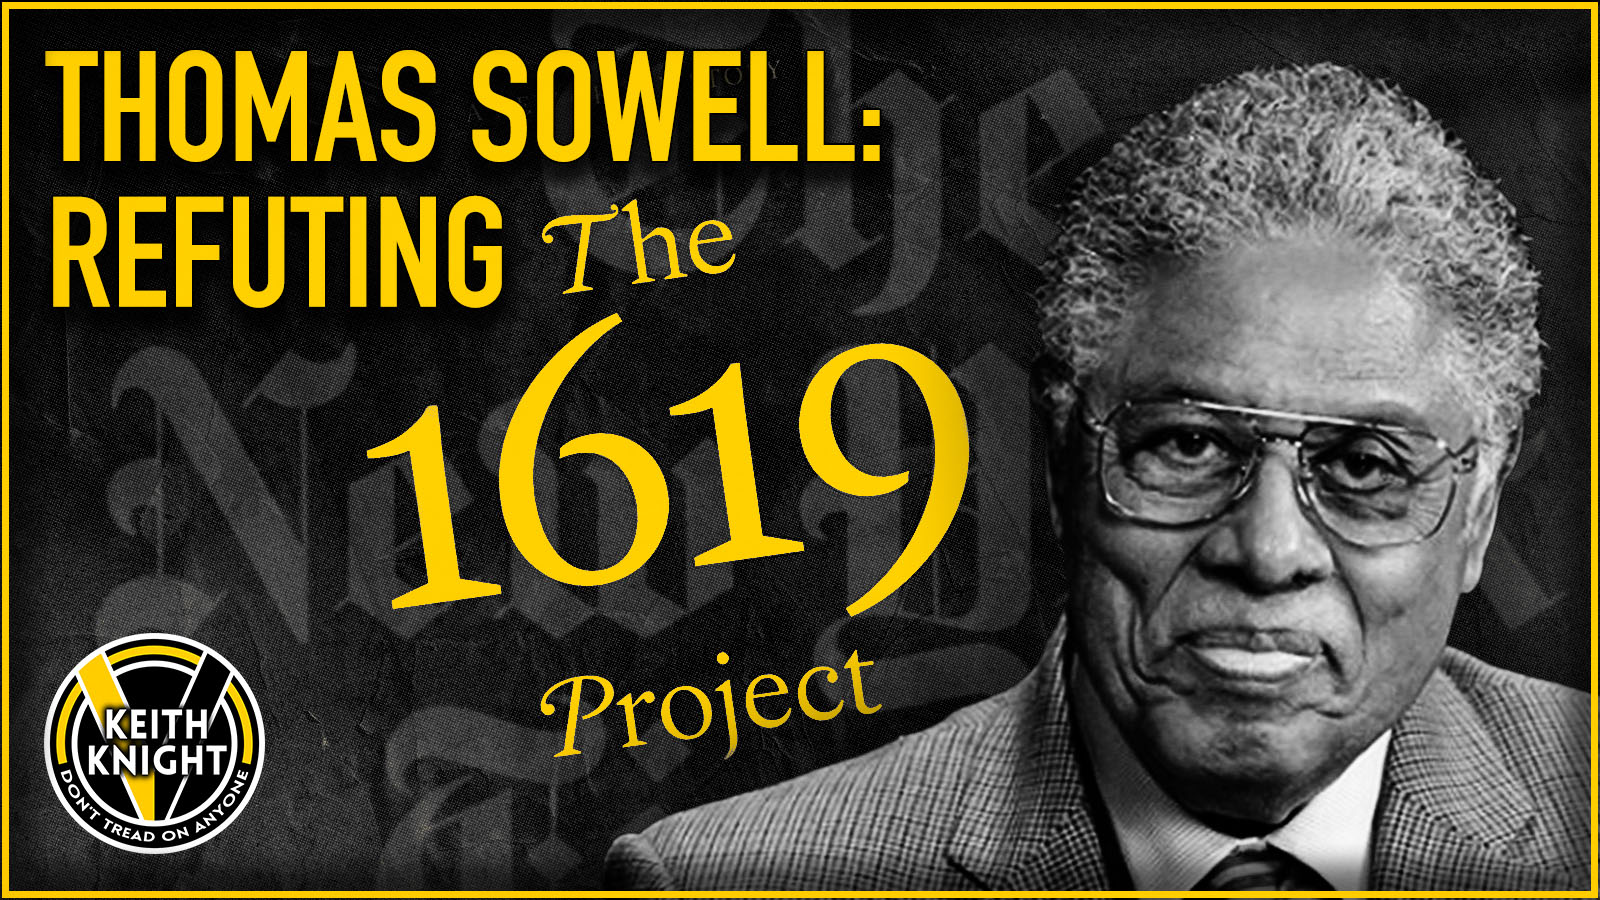 Thomas Sowell: Refuting the 1619 Project